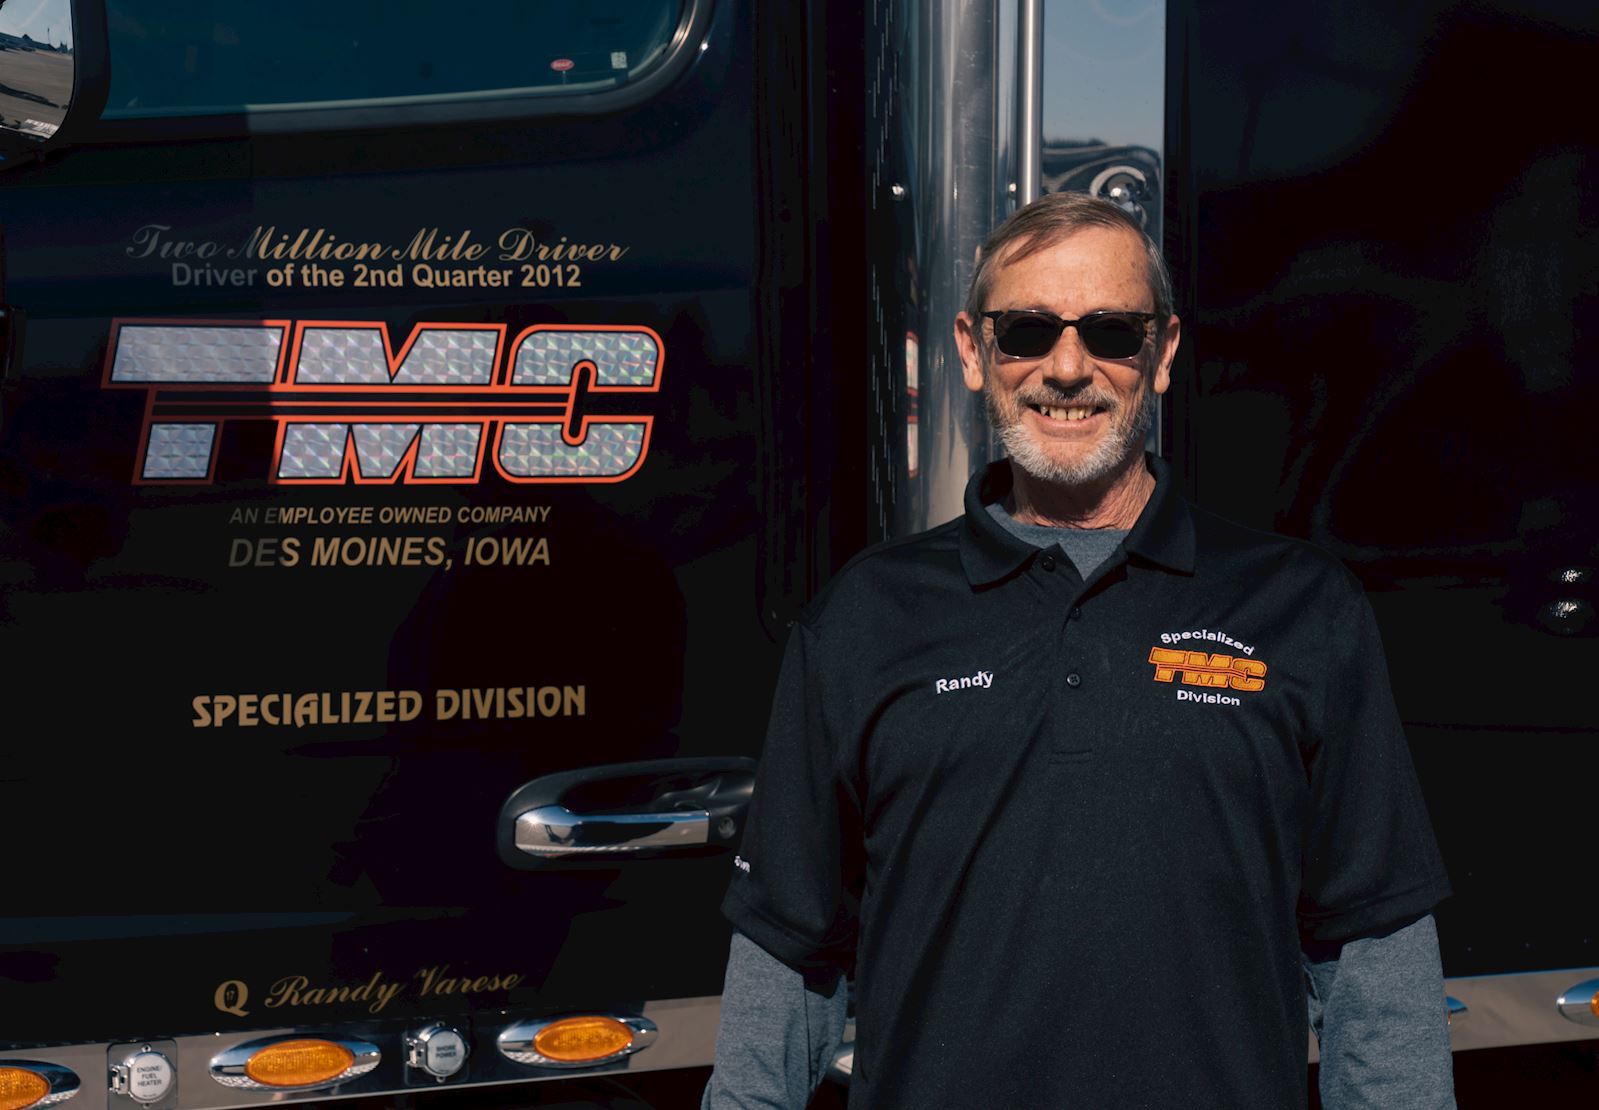 Randy Varese with his TMC truck